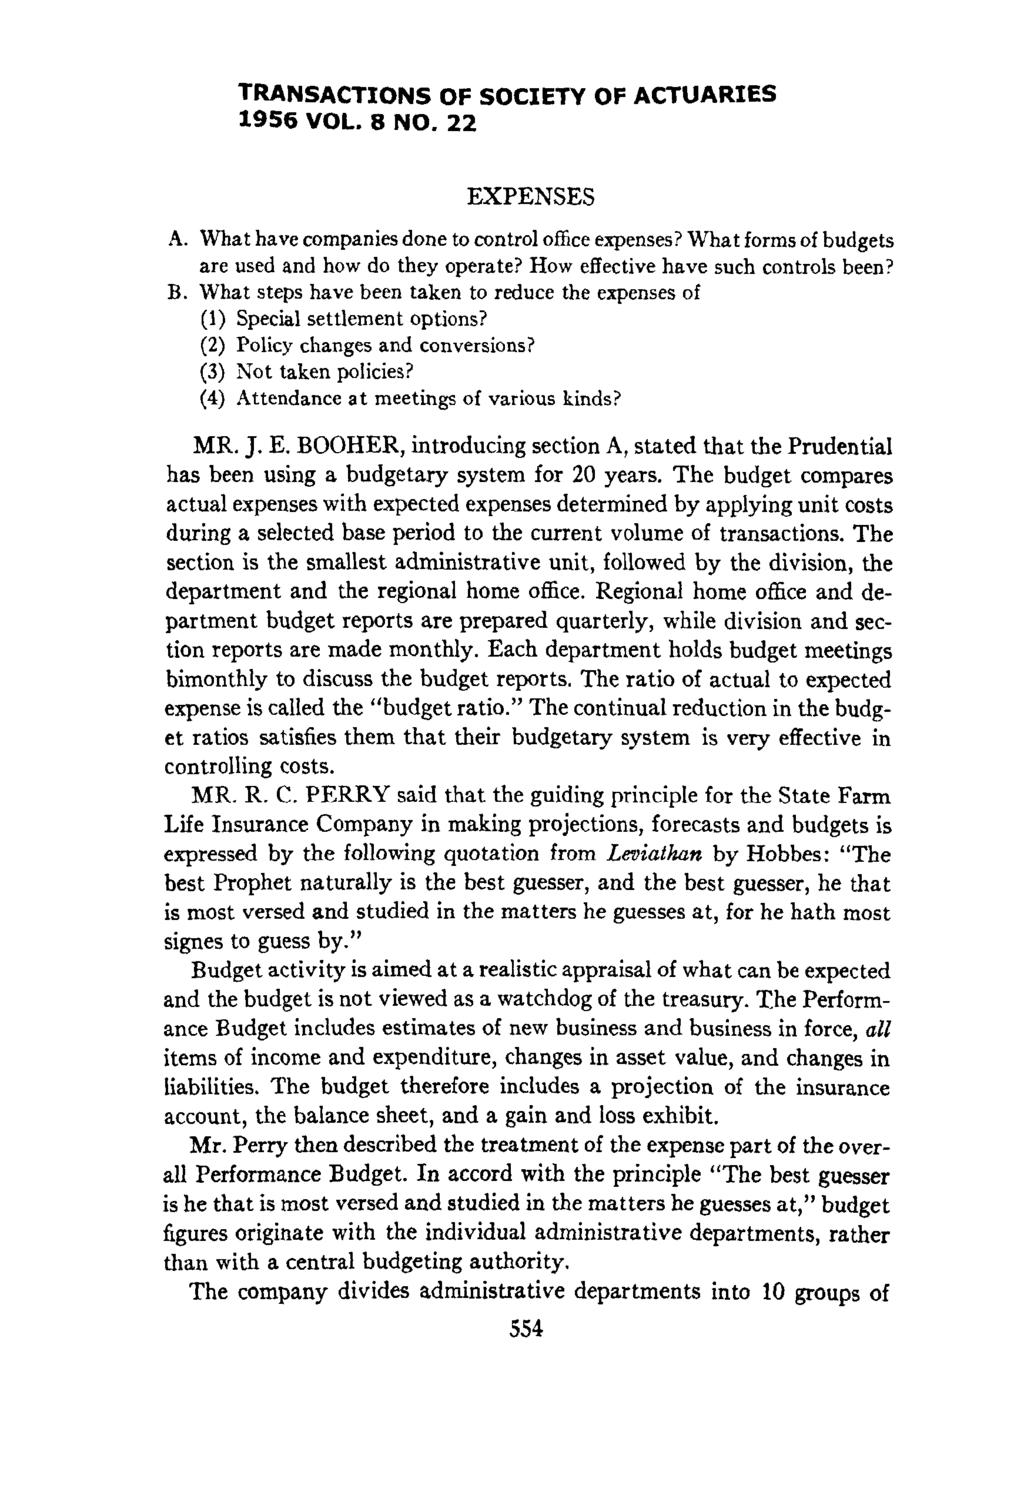 TRANSACTIONS OF SOCIETY OF ACTUARIES 1956 VOL. 8 NO. 22 EXPENSES A. What have companies done to control office expenses? What forms of budgets are used and how do they operate?